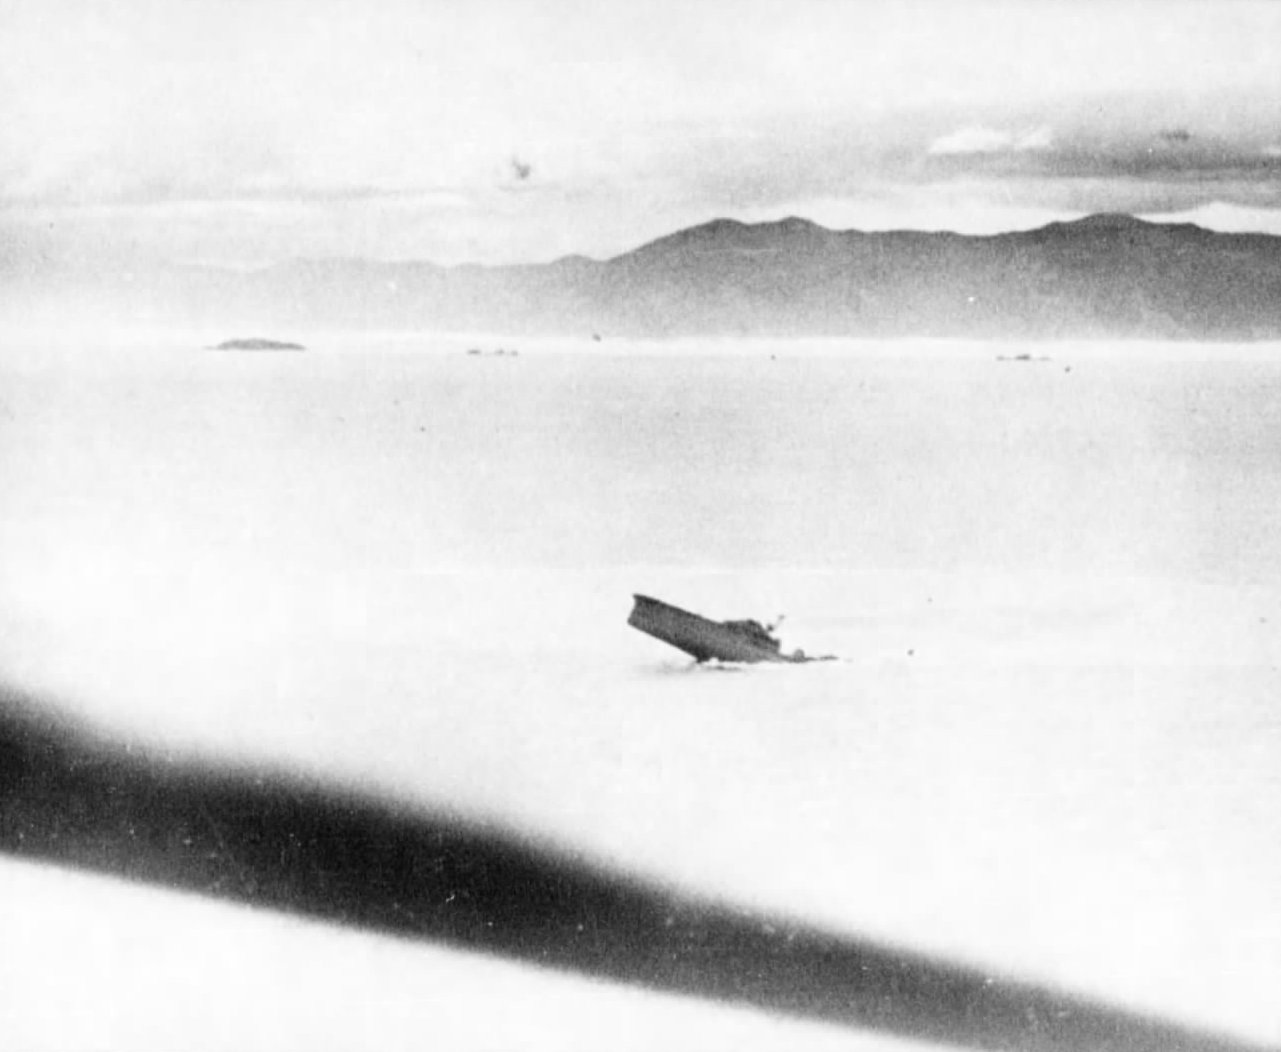 Japanese cruiser Kashii sinking by the stern after being attacked by United States carrier aircraft off the coast of French Indochina (Vietnam) north of Qui Nhon, Jan 12, 1945. Photo 6 of 9